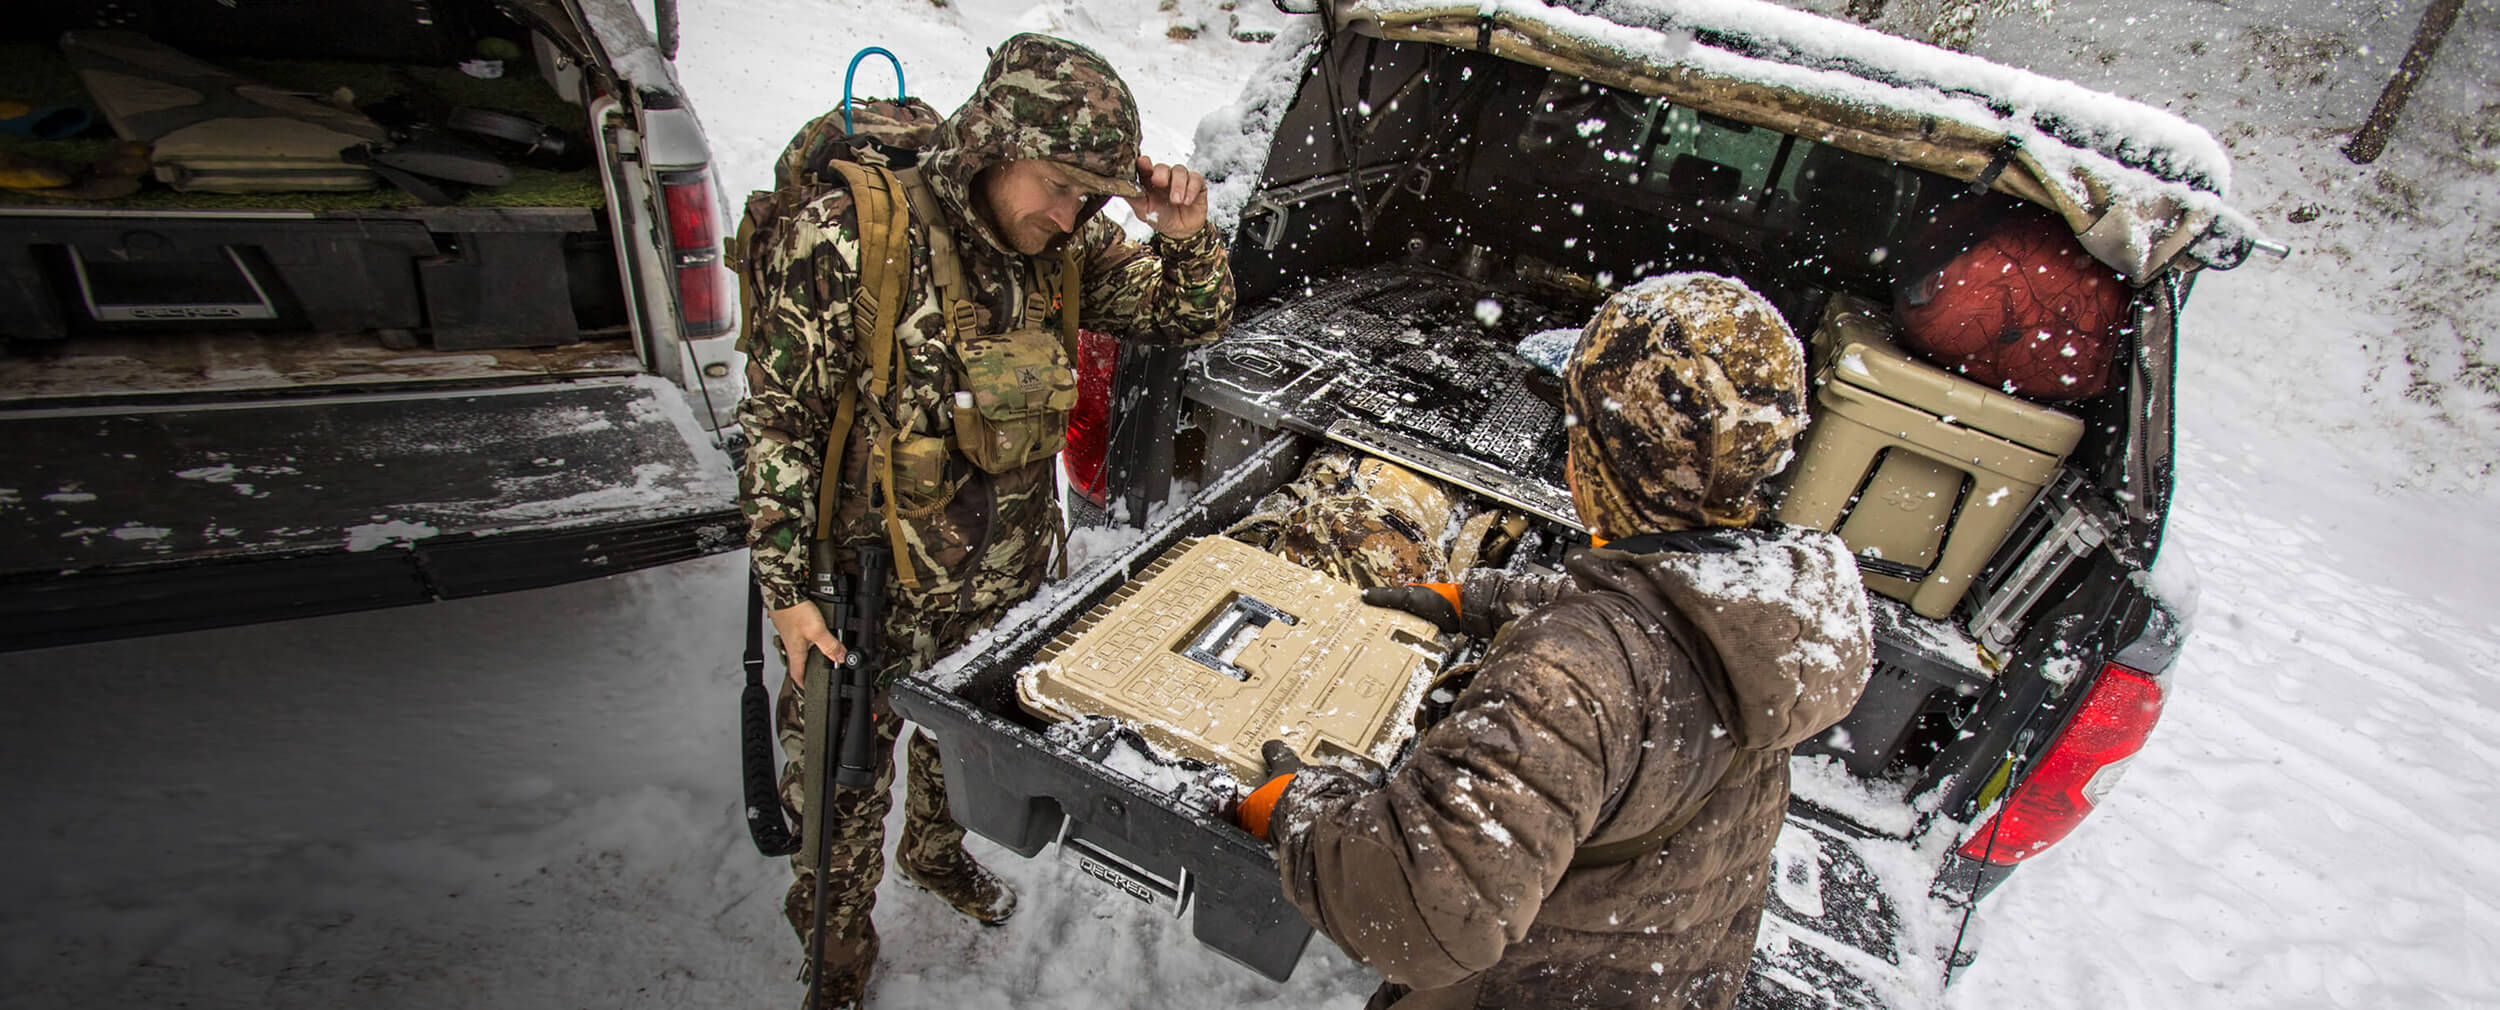 hunters grabbing a d box out of their decked drawer system